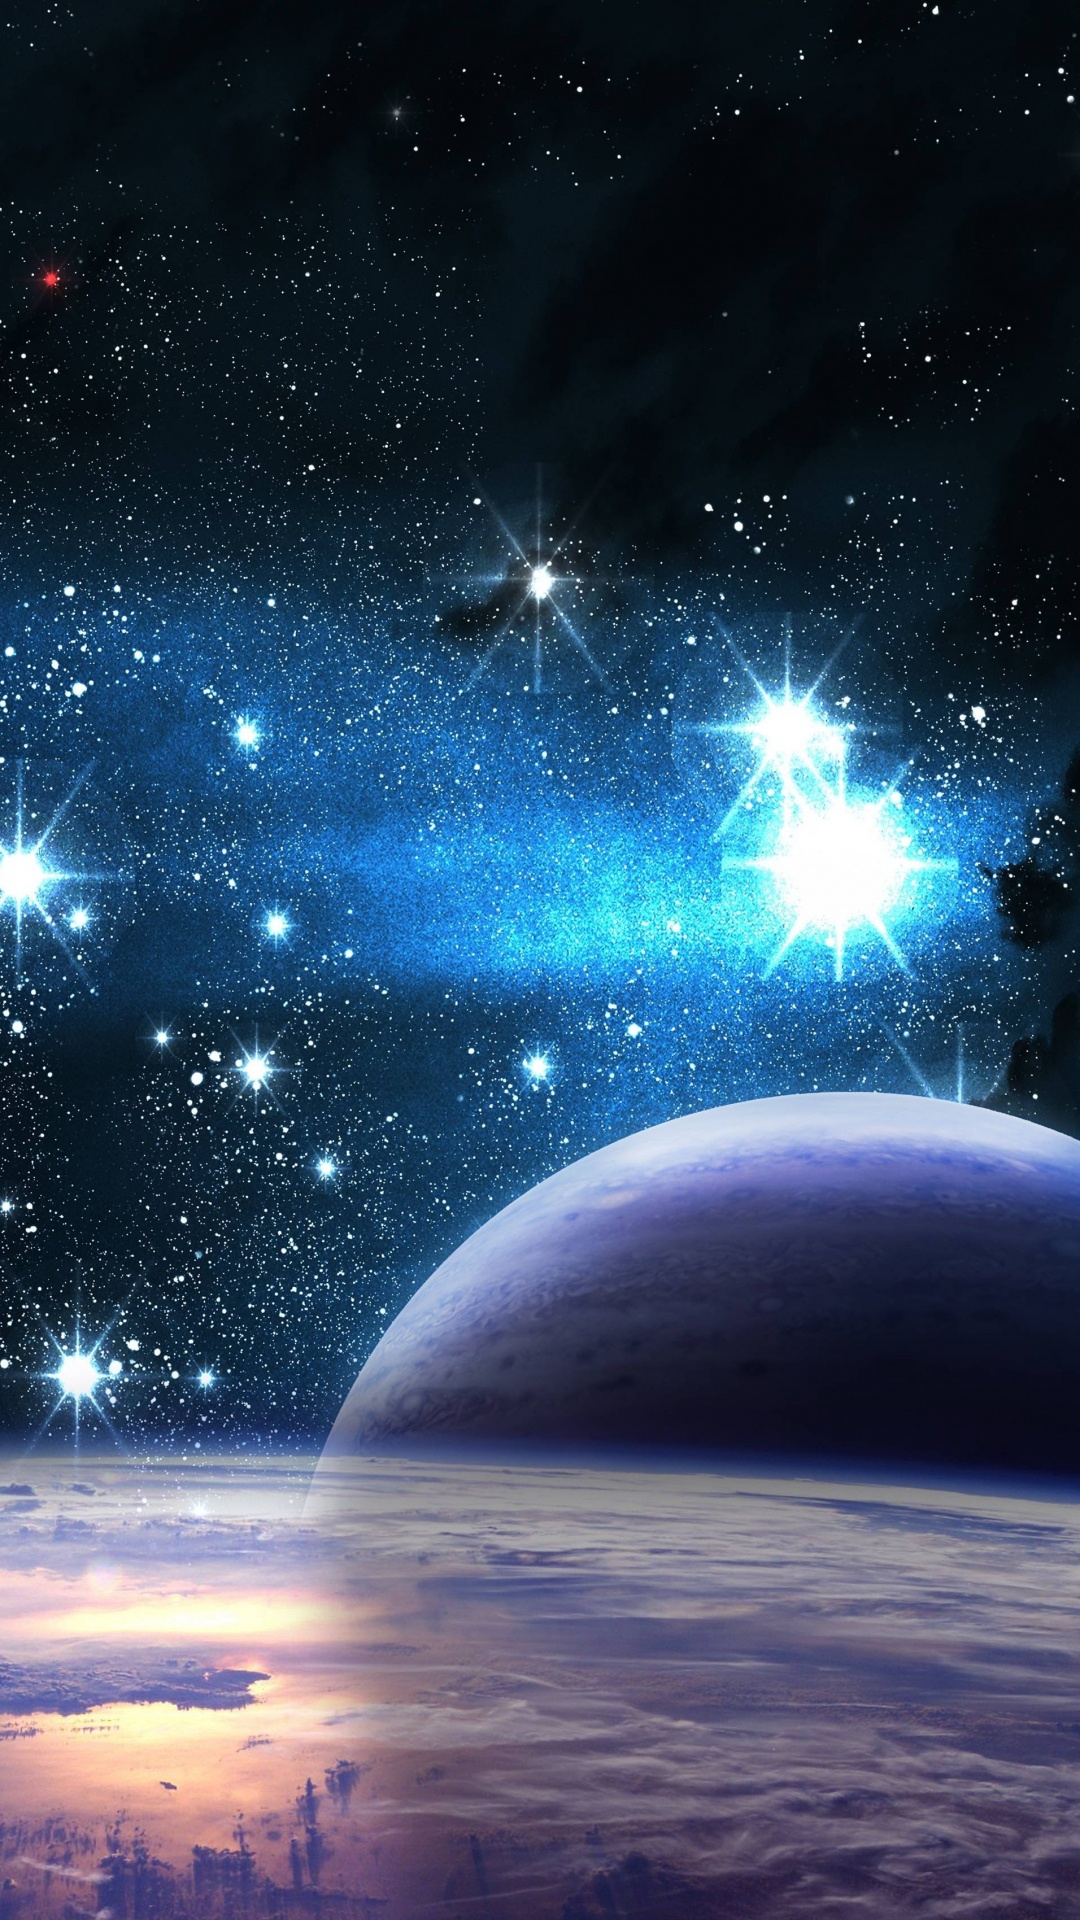 Blue and White Planet With Stars. Wallpaper in 1080x1920 Resolution